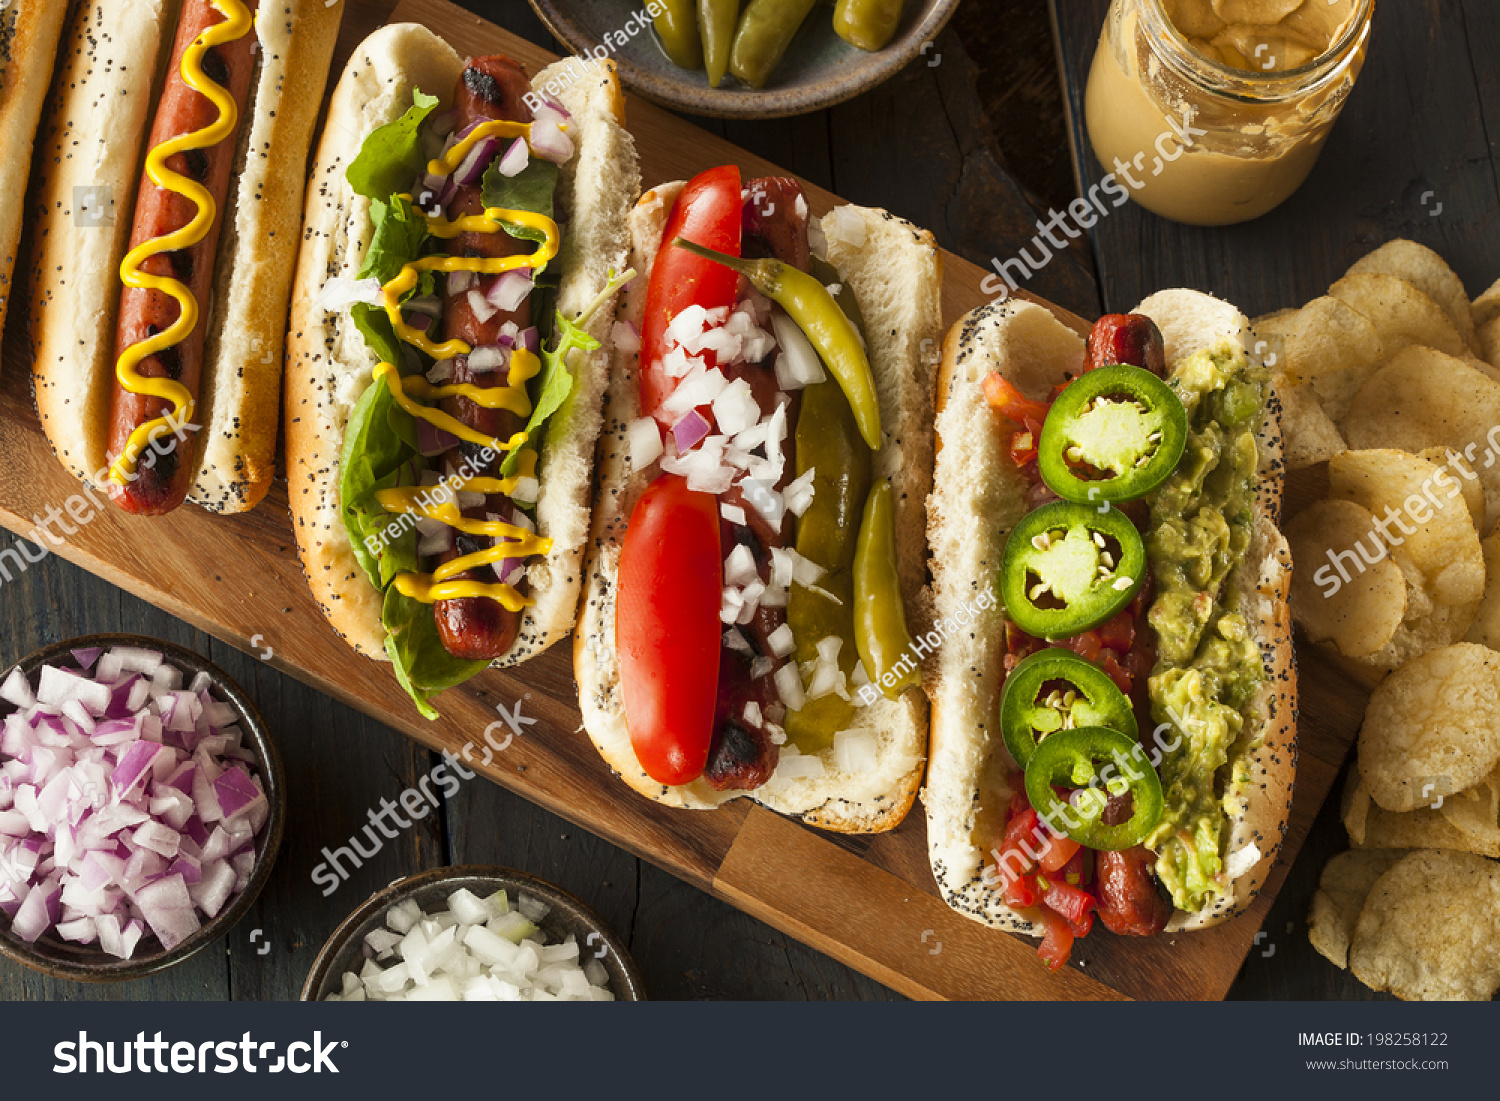 Gourmet Grilled All Beef Hots Dogs with Sides and Chips #198258122